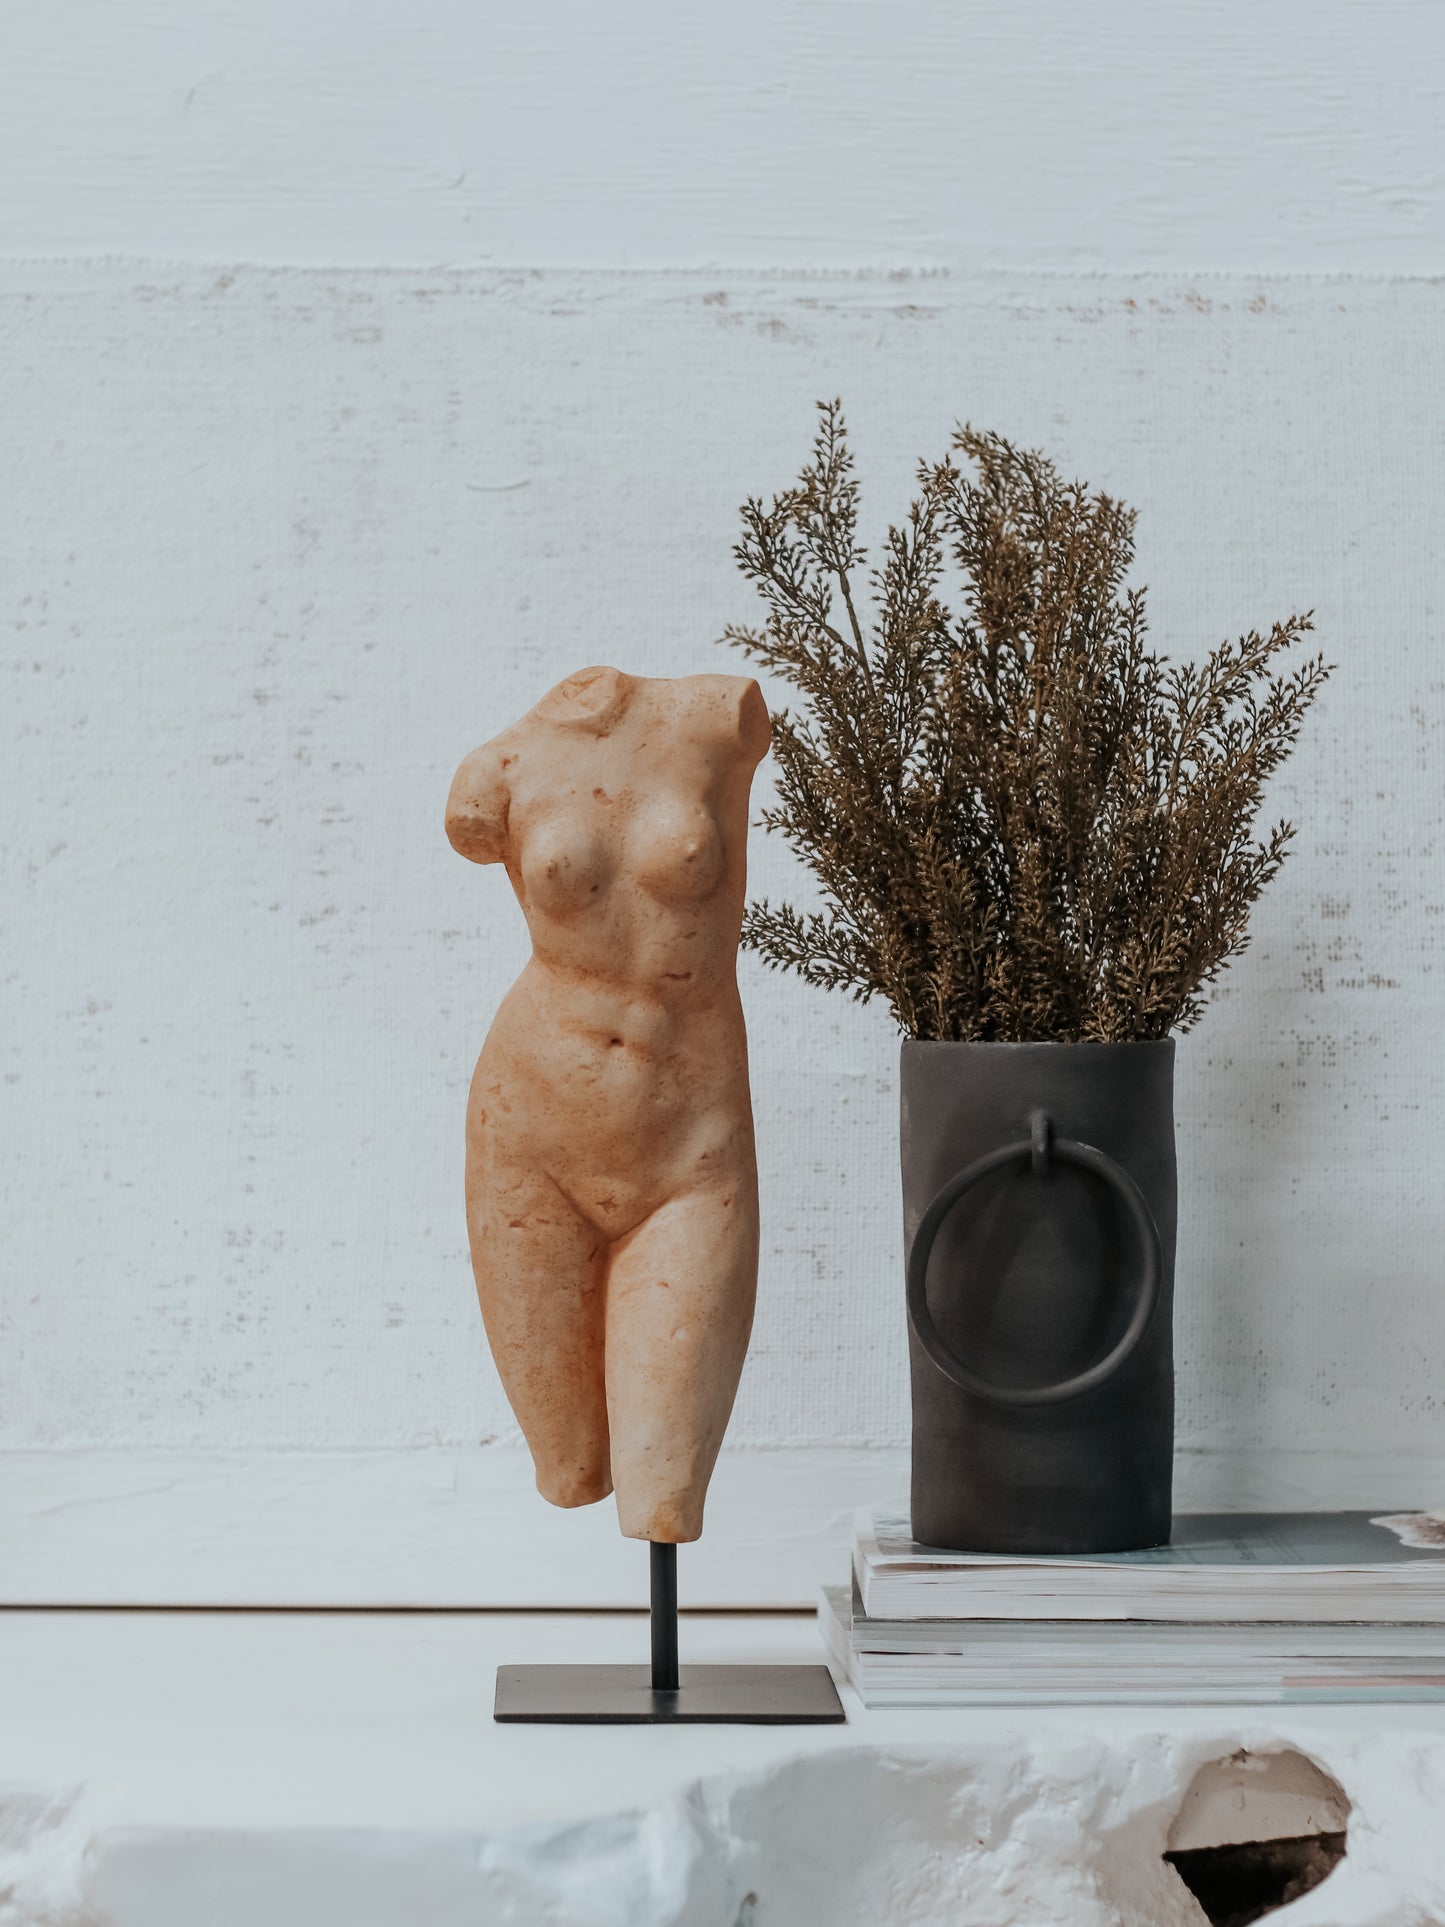 Female Body Figure on Metal Stand